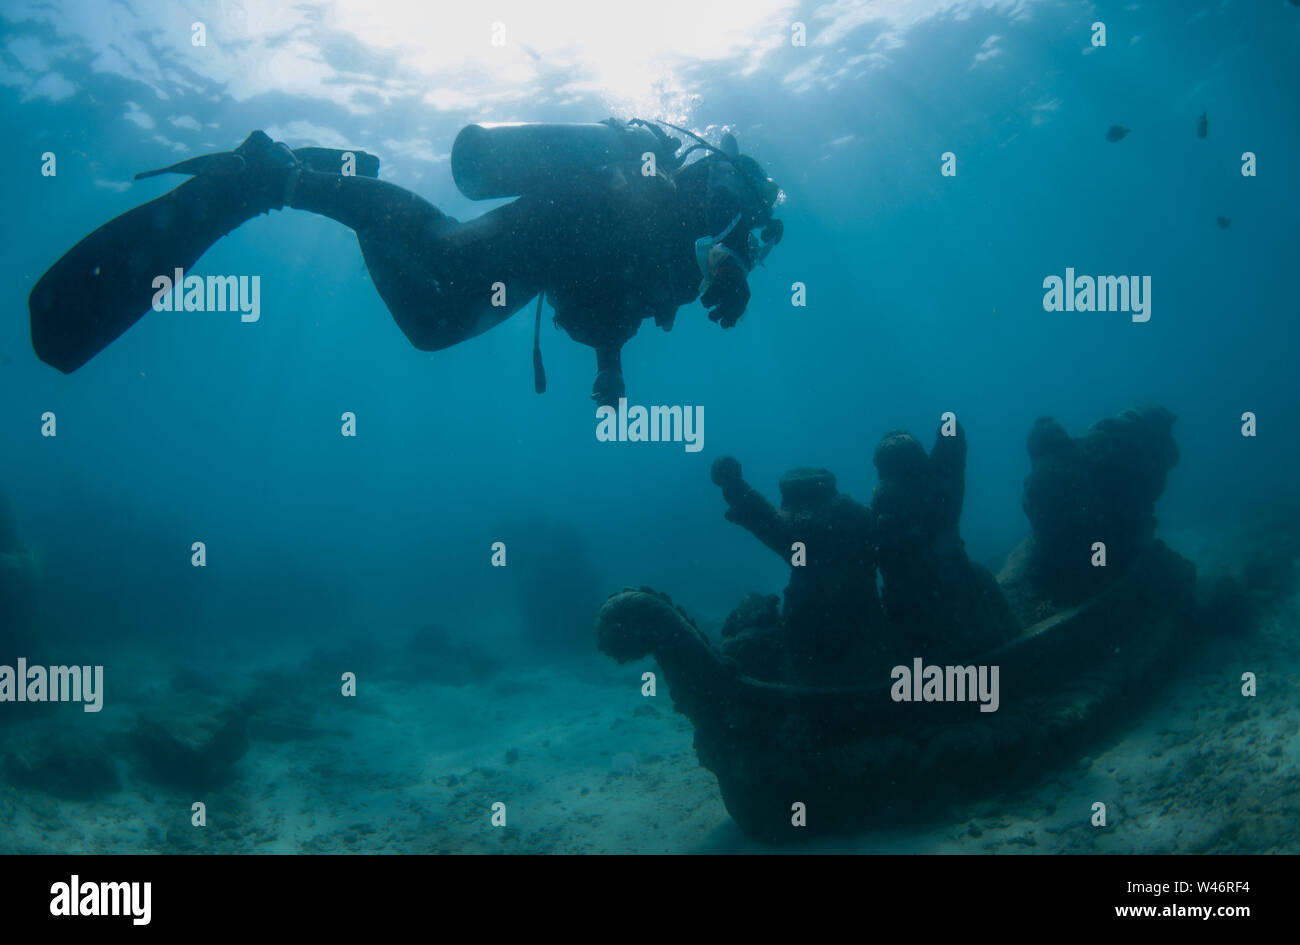 (190720) -- LINGSHUI, July 20, 2019 (Xinhua) -- A diving coach searches for underwater litter at the Boundary Island Tourist Attraction in Lingshui County, south China's Hainan Province, July 20, 2019. Boundary Island in south China's Hainan Province is hosting its first series of diving-themed activities from July 19 to 21, attracting diving enthusiasts, tourists, marine ecologists and diving equipment dealers worldwide. The PADI (Professional Association of Diving Instructors) Women Dive Day event was also held here on Saturday alongside the main events. (Xinhua/Yang Guanyu) Credit: Xinhua/A Stock Photo